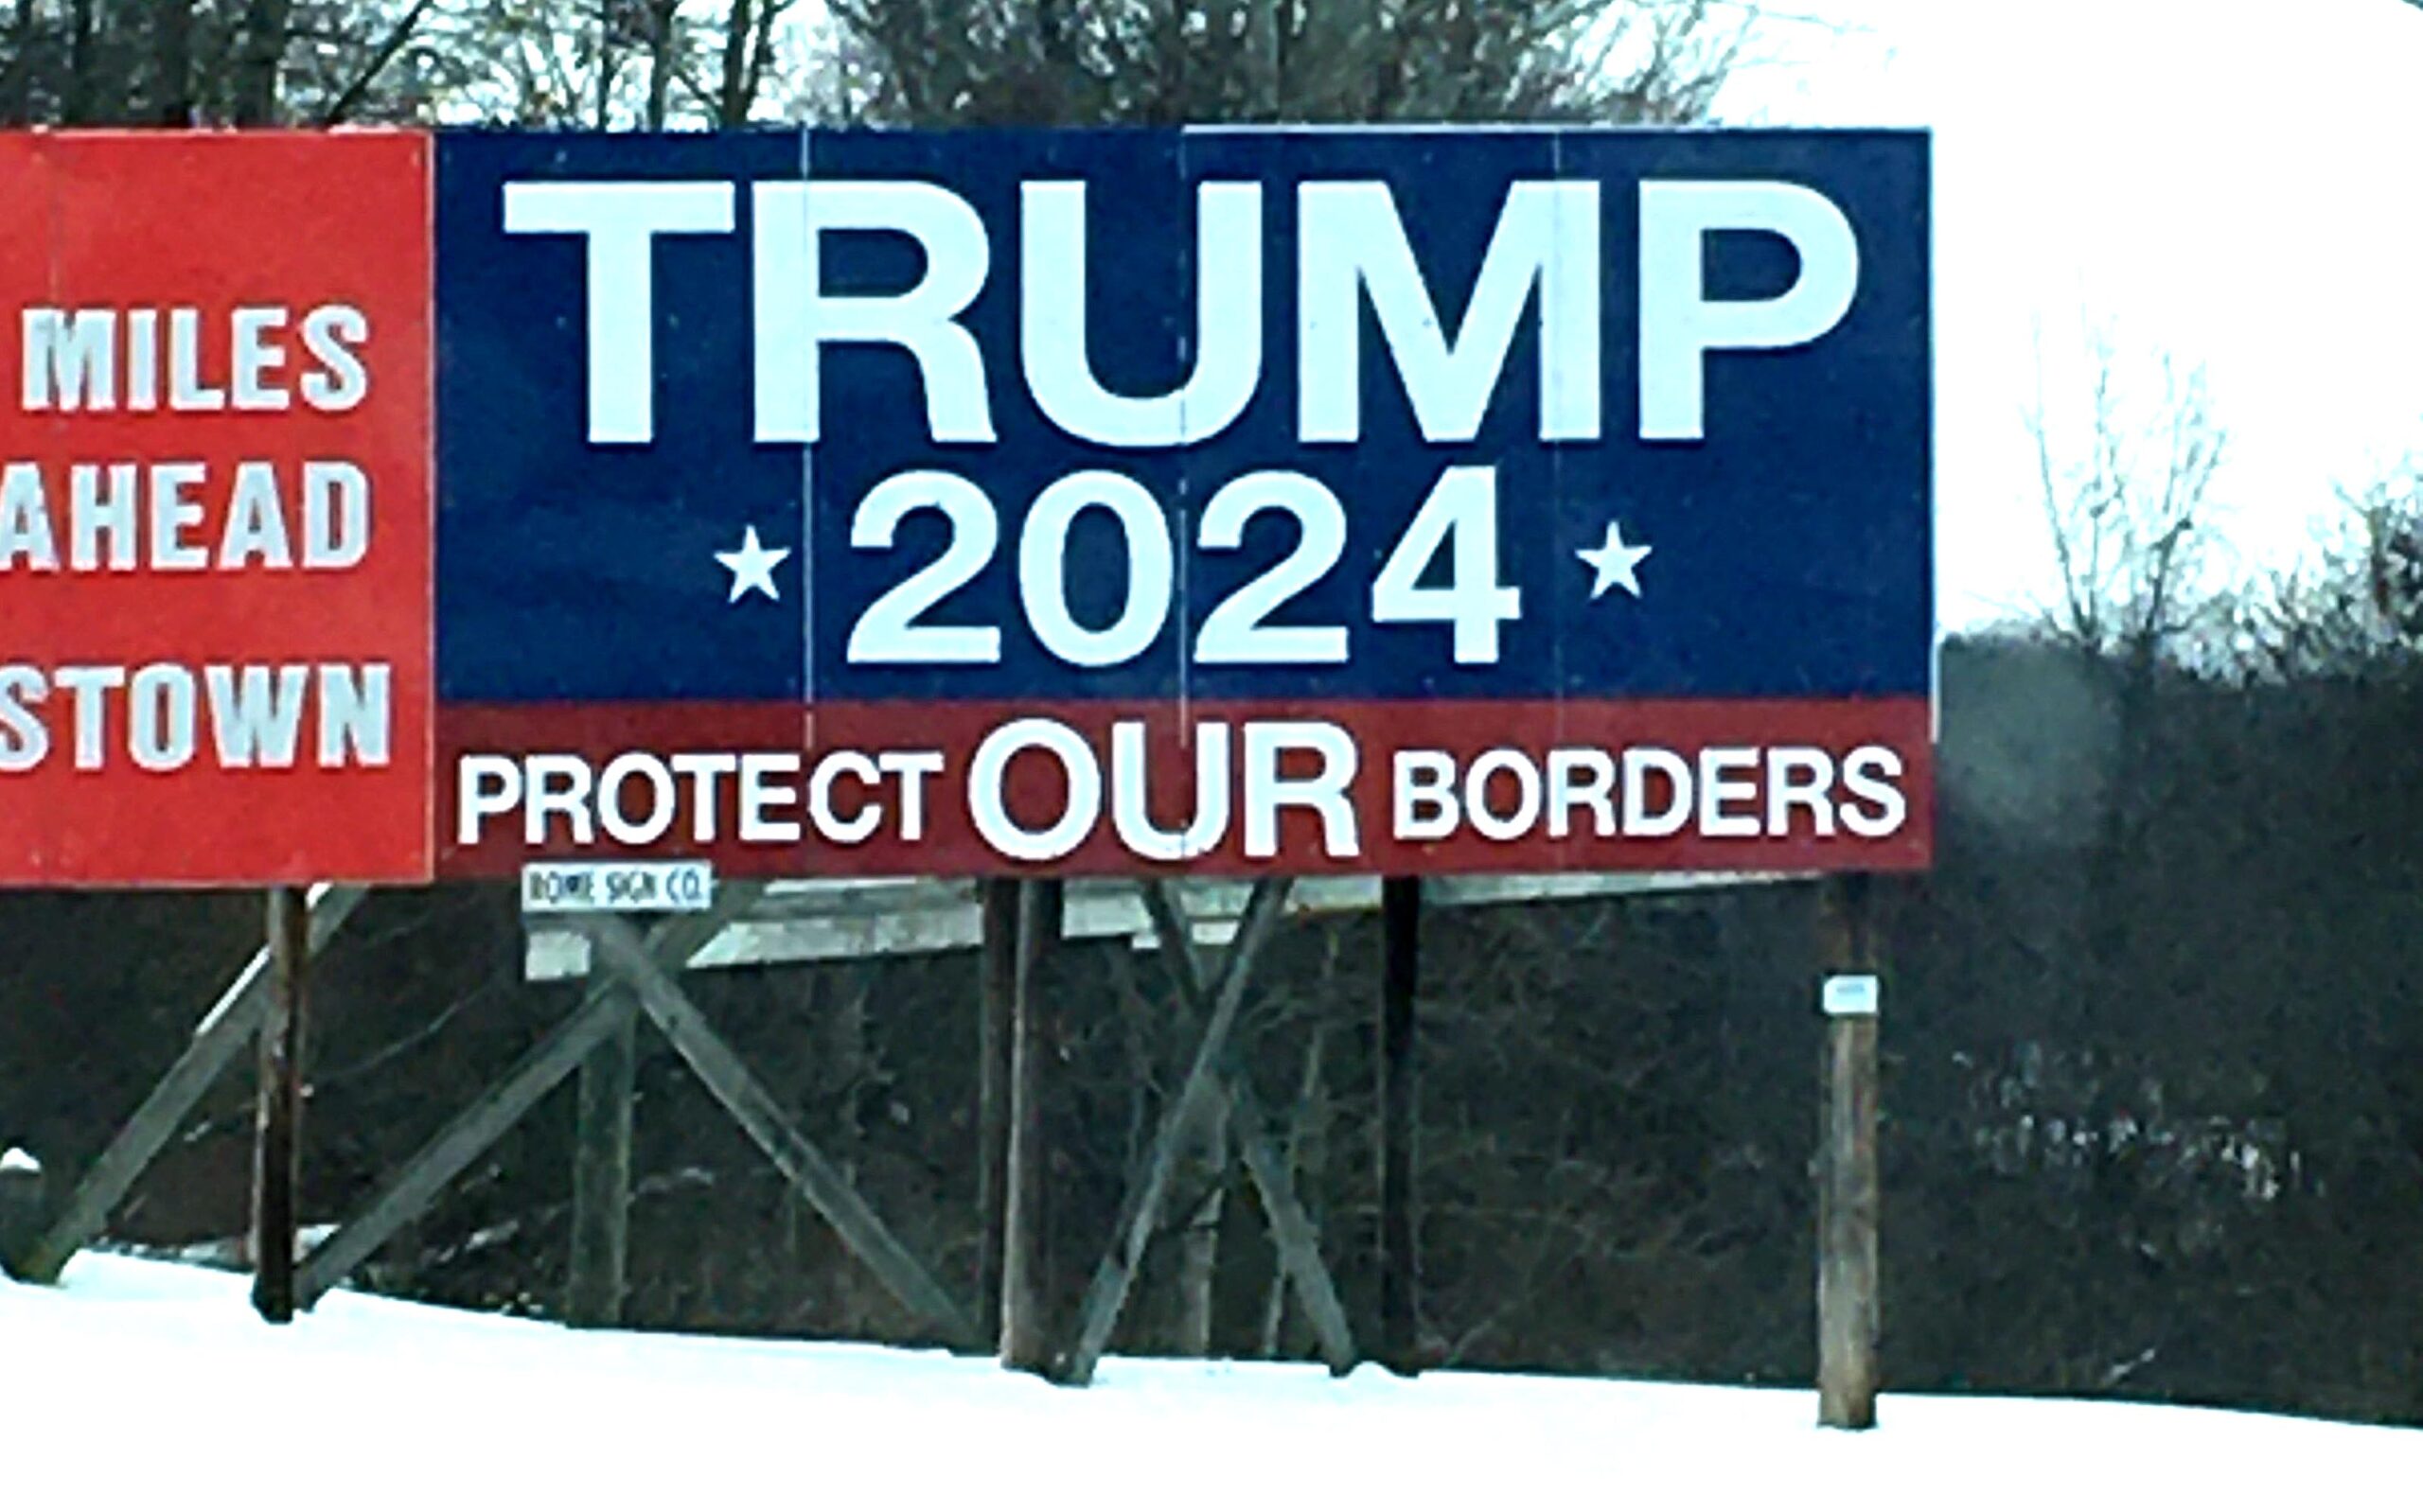 Upset About ‘Trump 2024’? Help May Be On The Way All Otsego